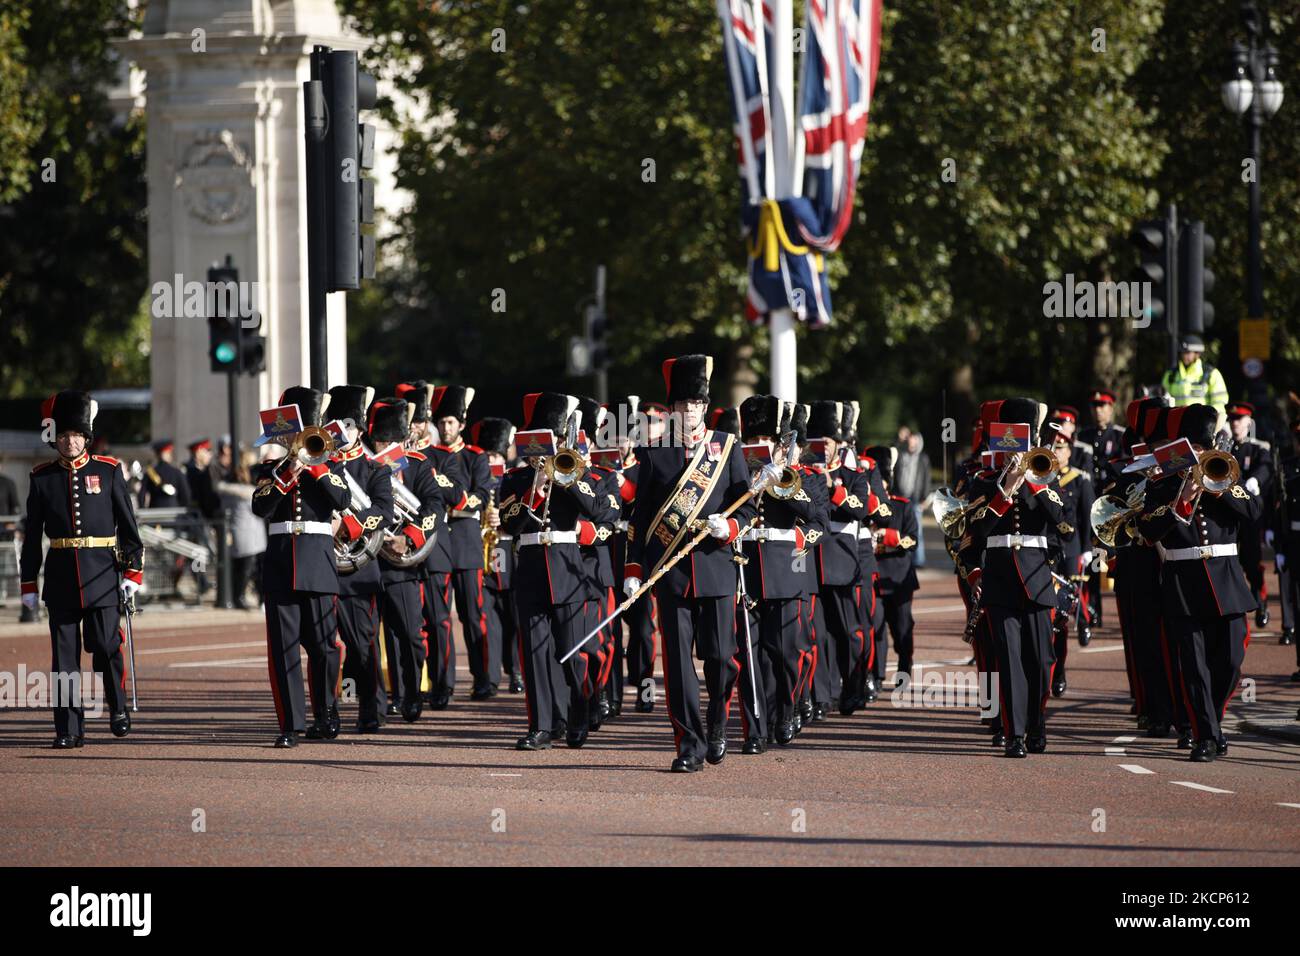 Band members of the Royal Regiment of Canadian Artillery march along the Mall from St James's Palace to Buckingham Palace during their first Changing of the Guard 'dismount' from duty in London, England, on October 6, 2021. Ninety Canadian personnel are carrying out Queen's Guard duties at the four residences of the Royal Family in London (Buckingham Palace, St James's Palace, Windsor Castle and the Tower of London) from October 4-22. For the mount and dismount ceremonies, which take place several times throughout the period, the Queen’s Guard troops are accompanied by the 36-person Royal Cana Stock Photo